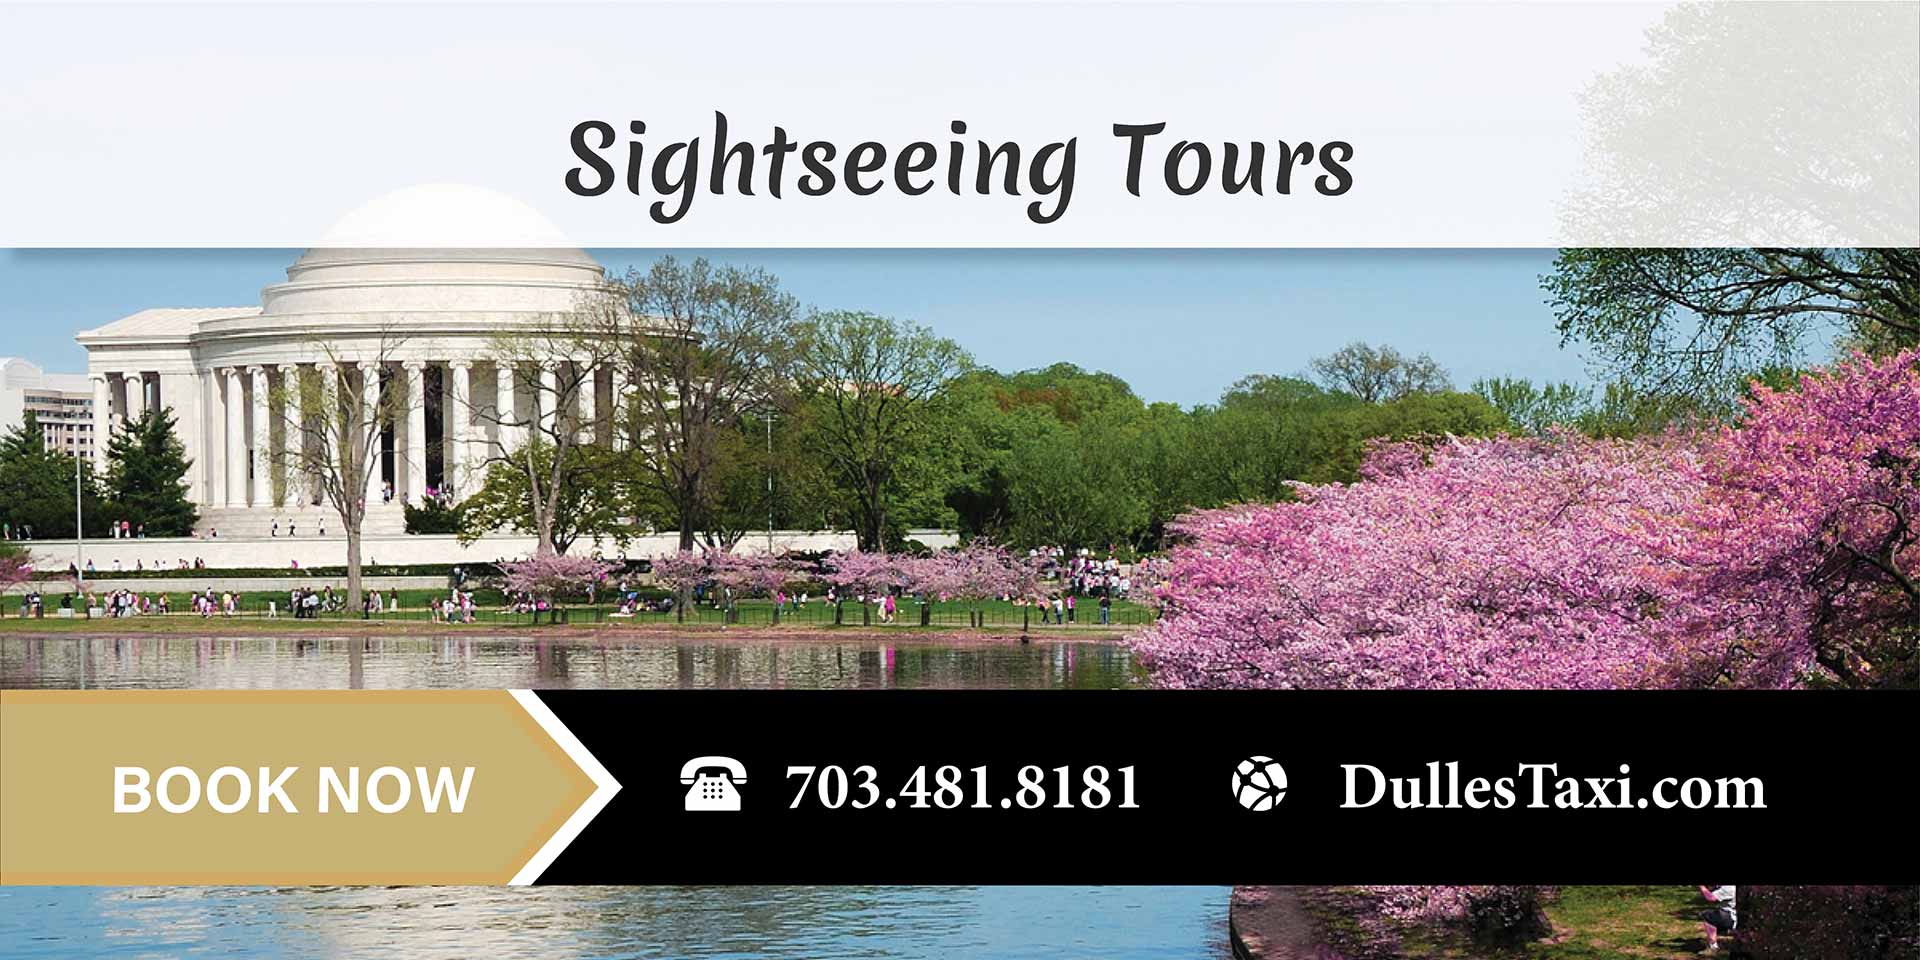 Dulles Taxi - Sightseeing Tours